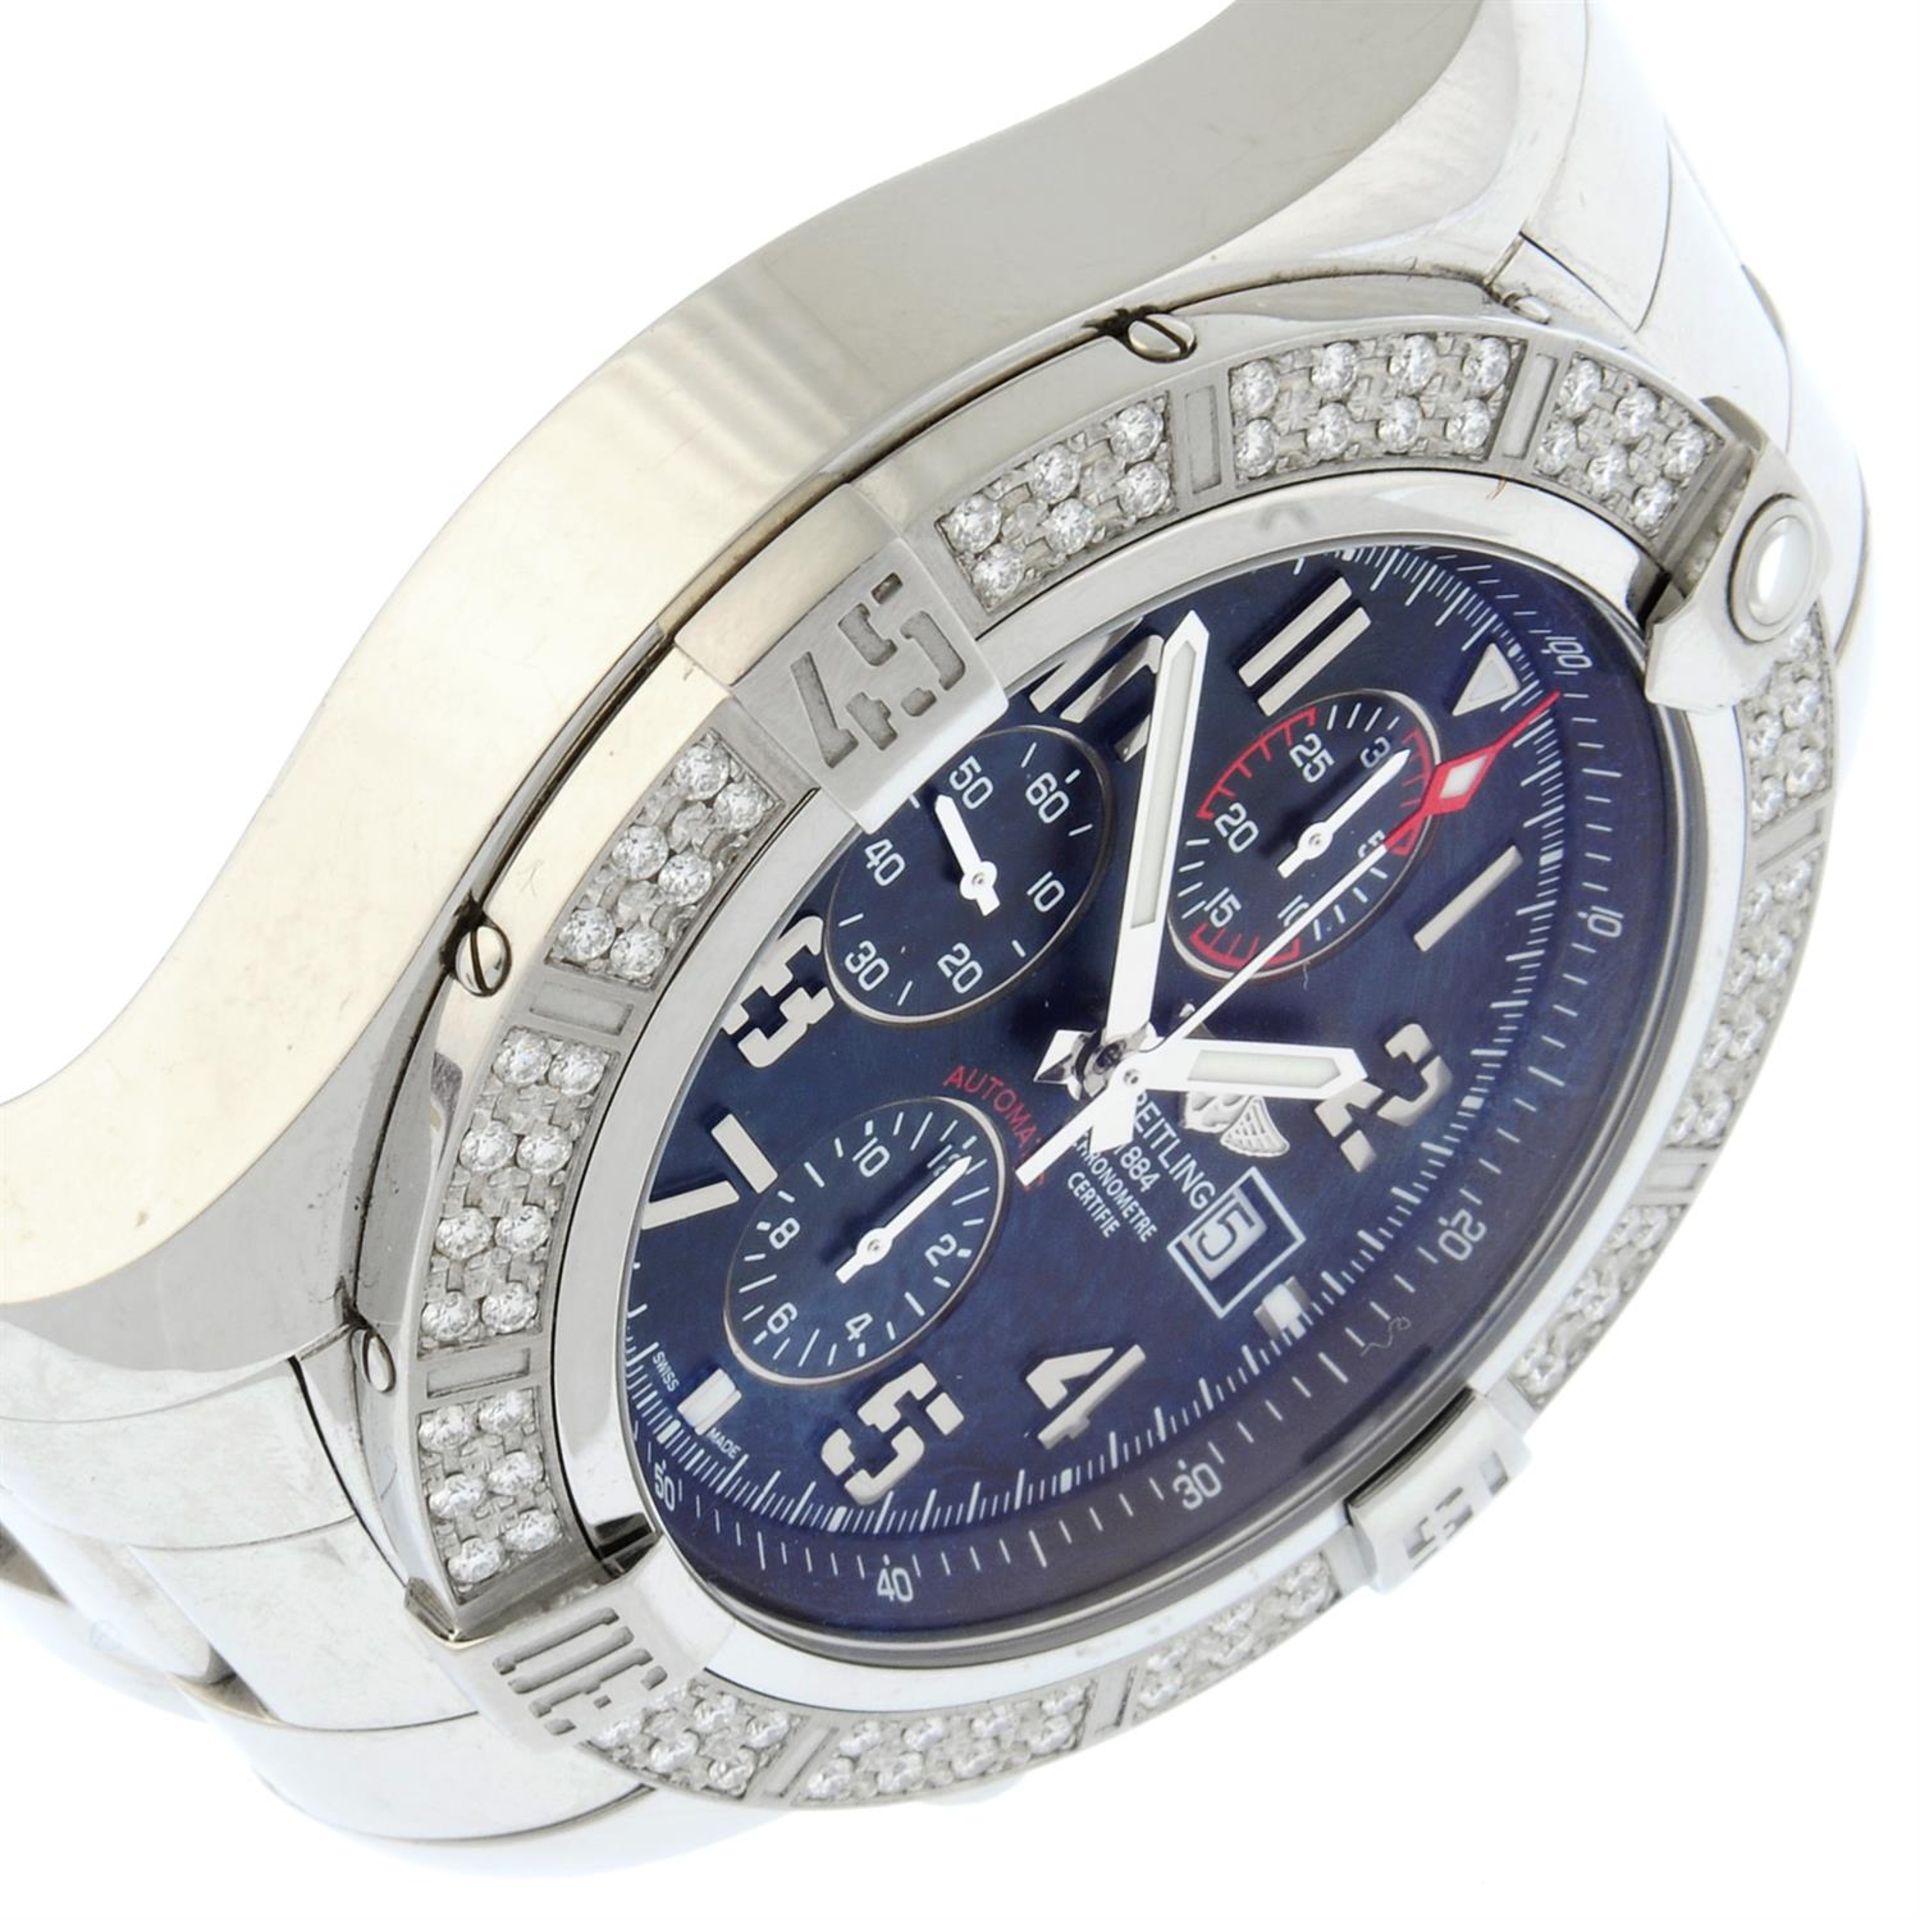 Breitling - a Super Avenger II chronograph watch, 48mm. - Image 4 of 7